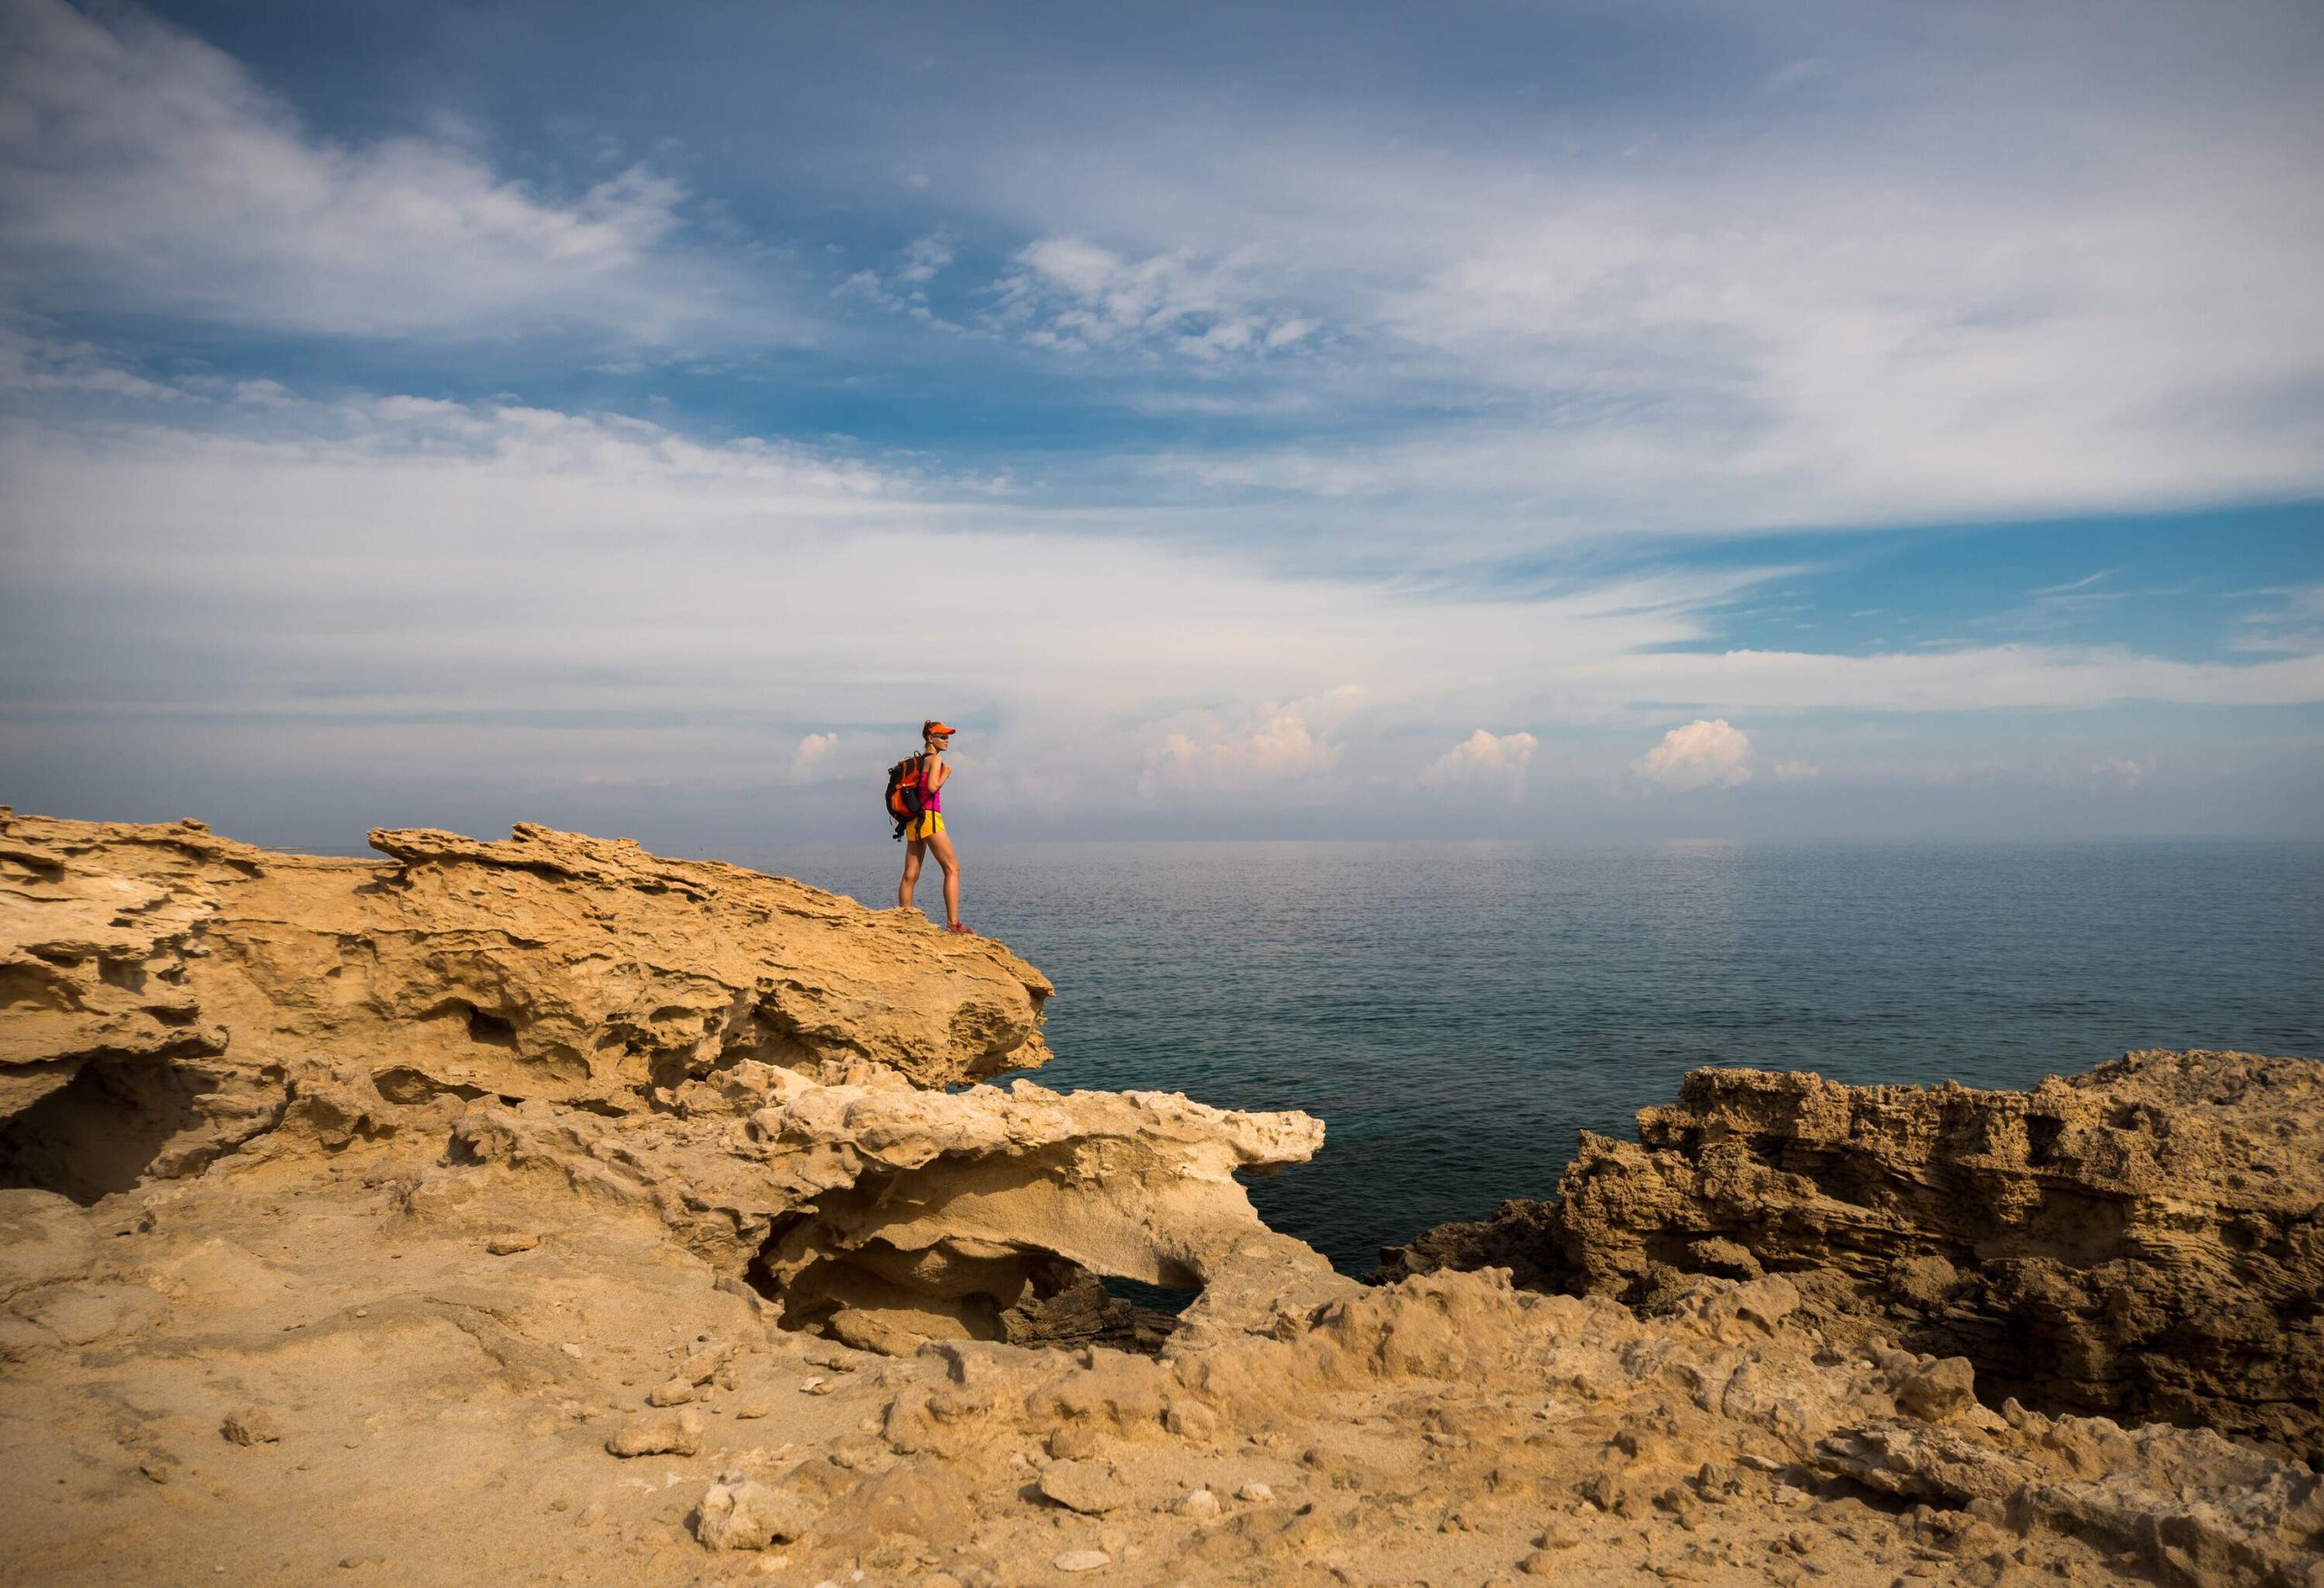 A male hiker with a backpack standing on a hanging cliff overlooking the vast ocean.